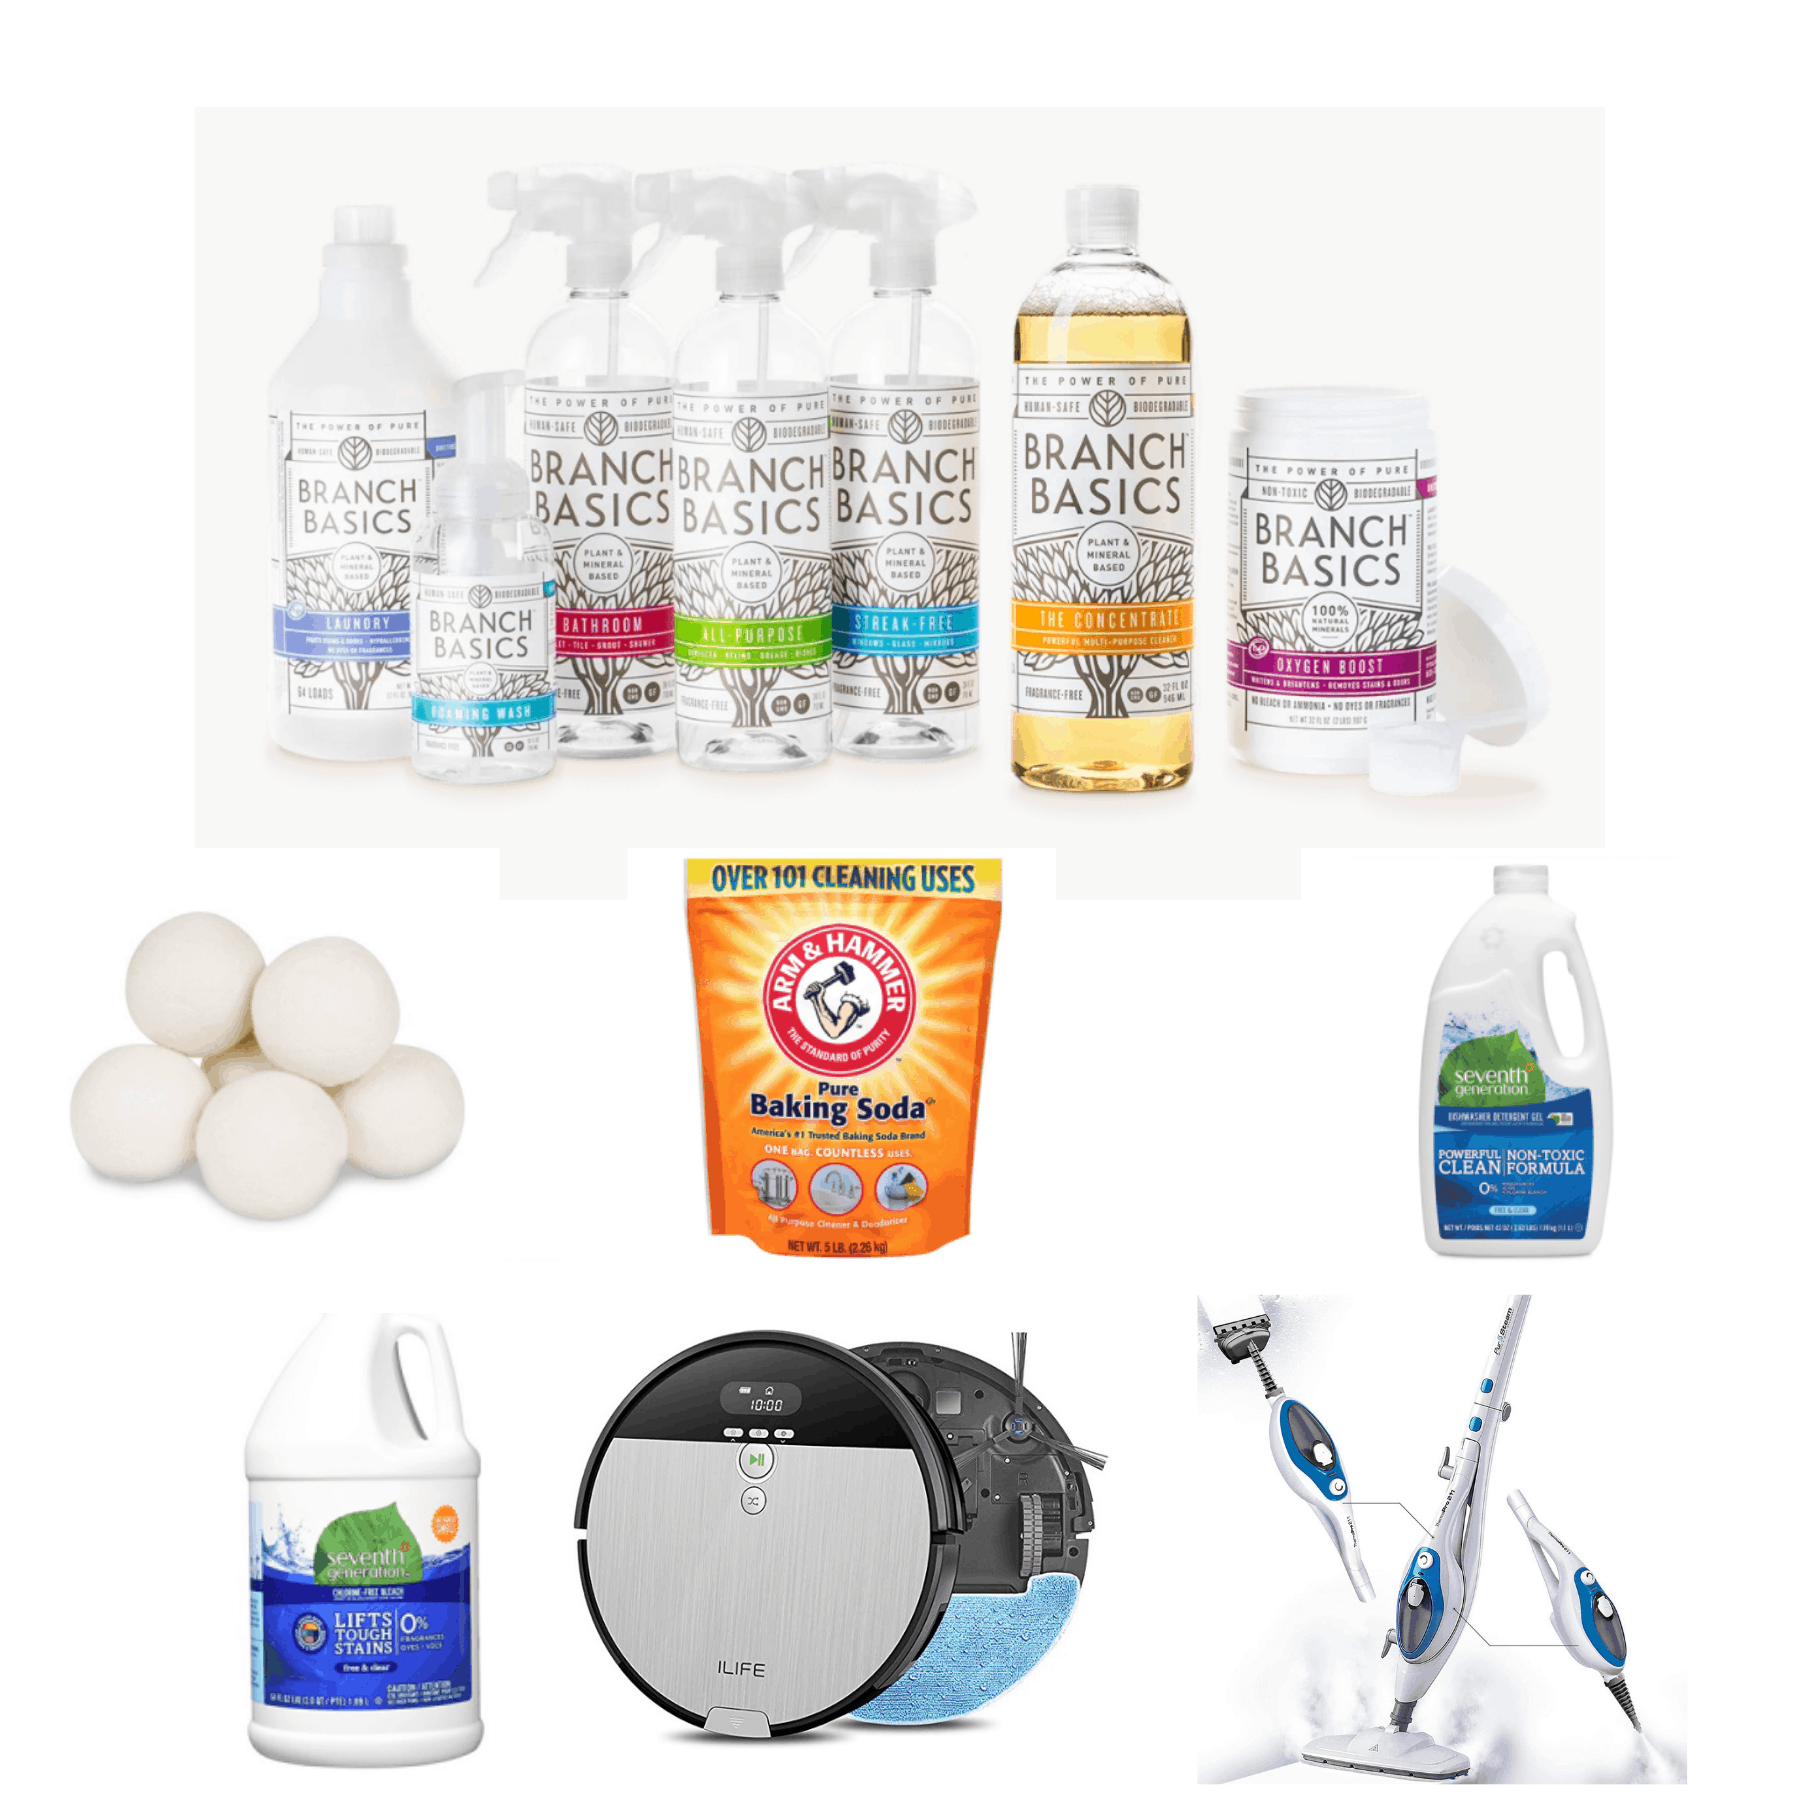 Discounted non-toxic cleaning products